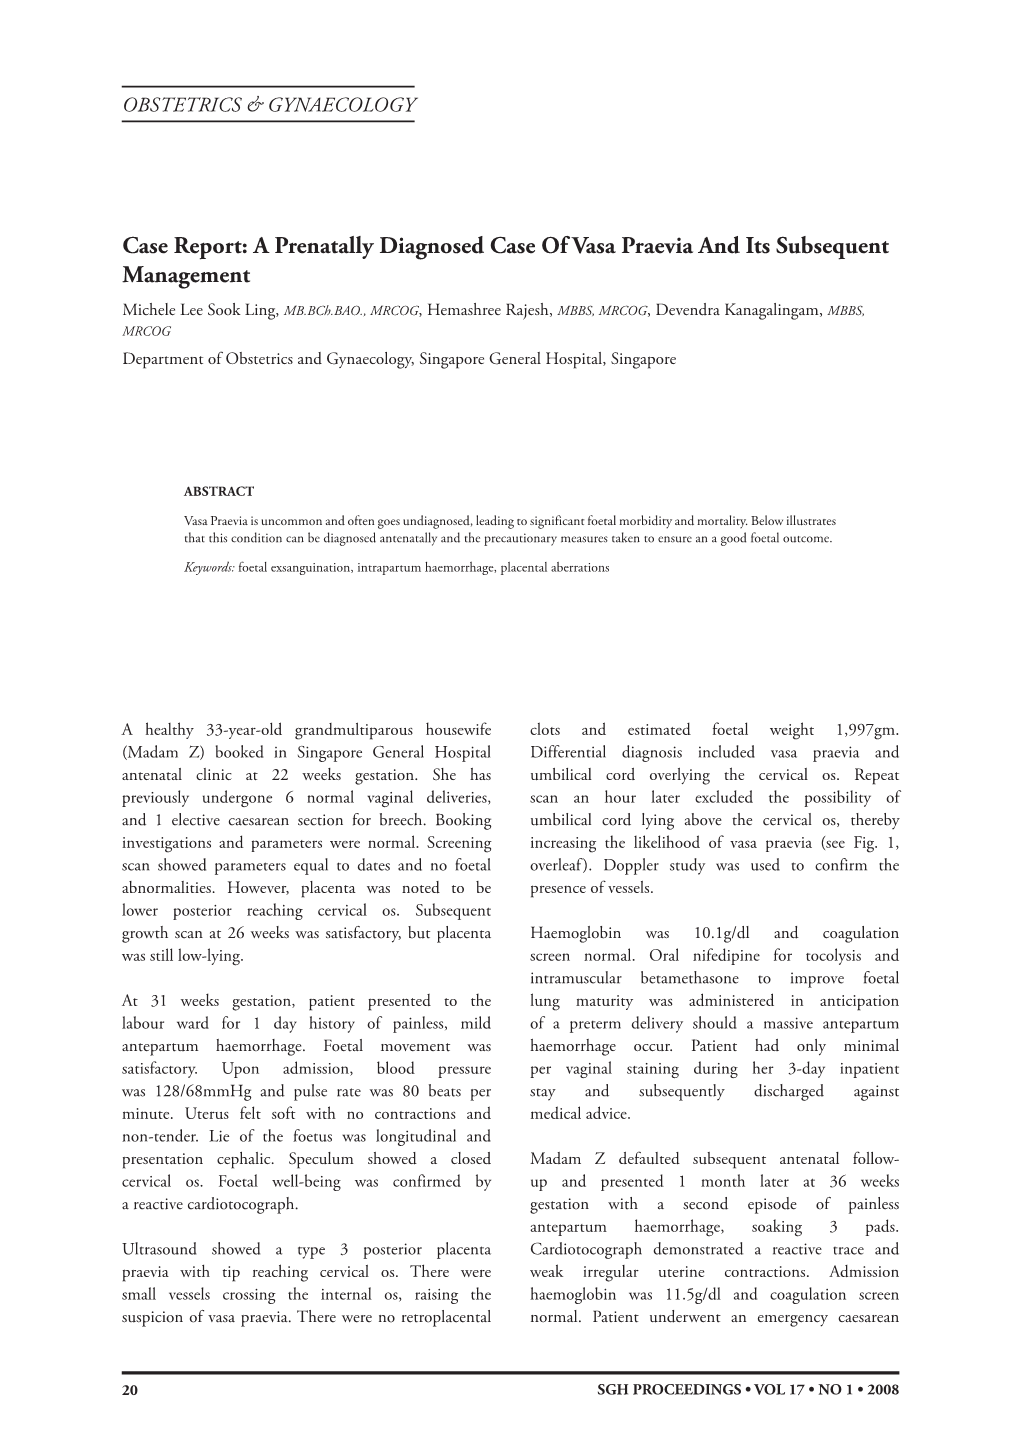 Case Report: a Prenatally Diagnosed Case of Vasa Praevia and Its Subsequent Management